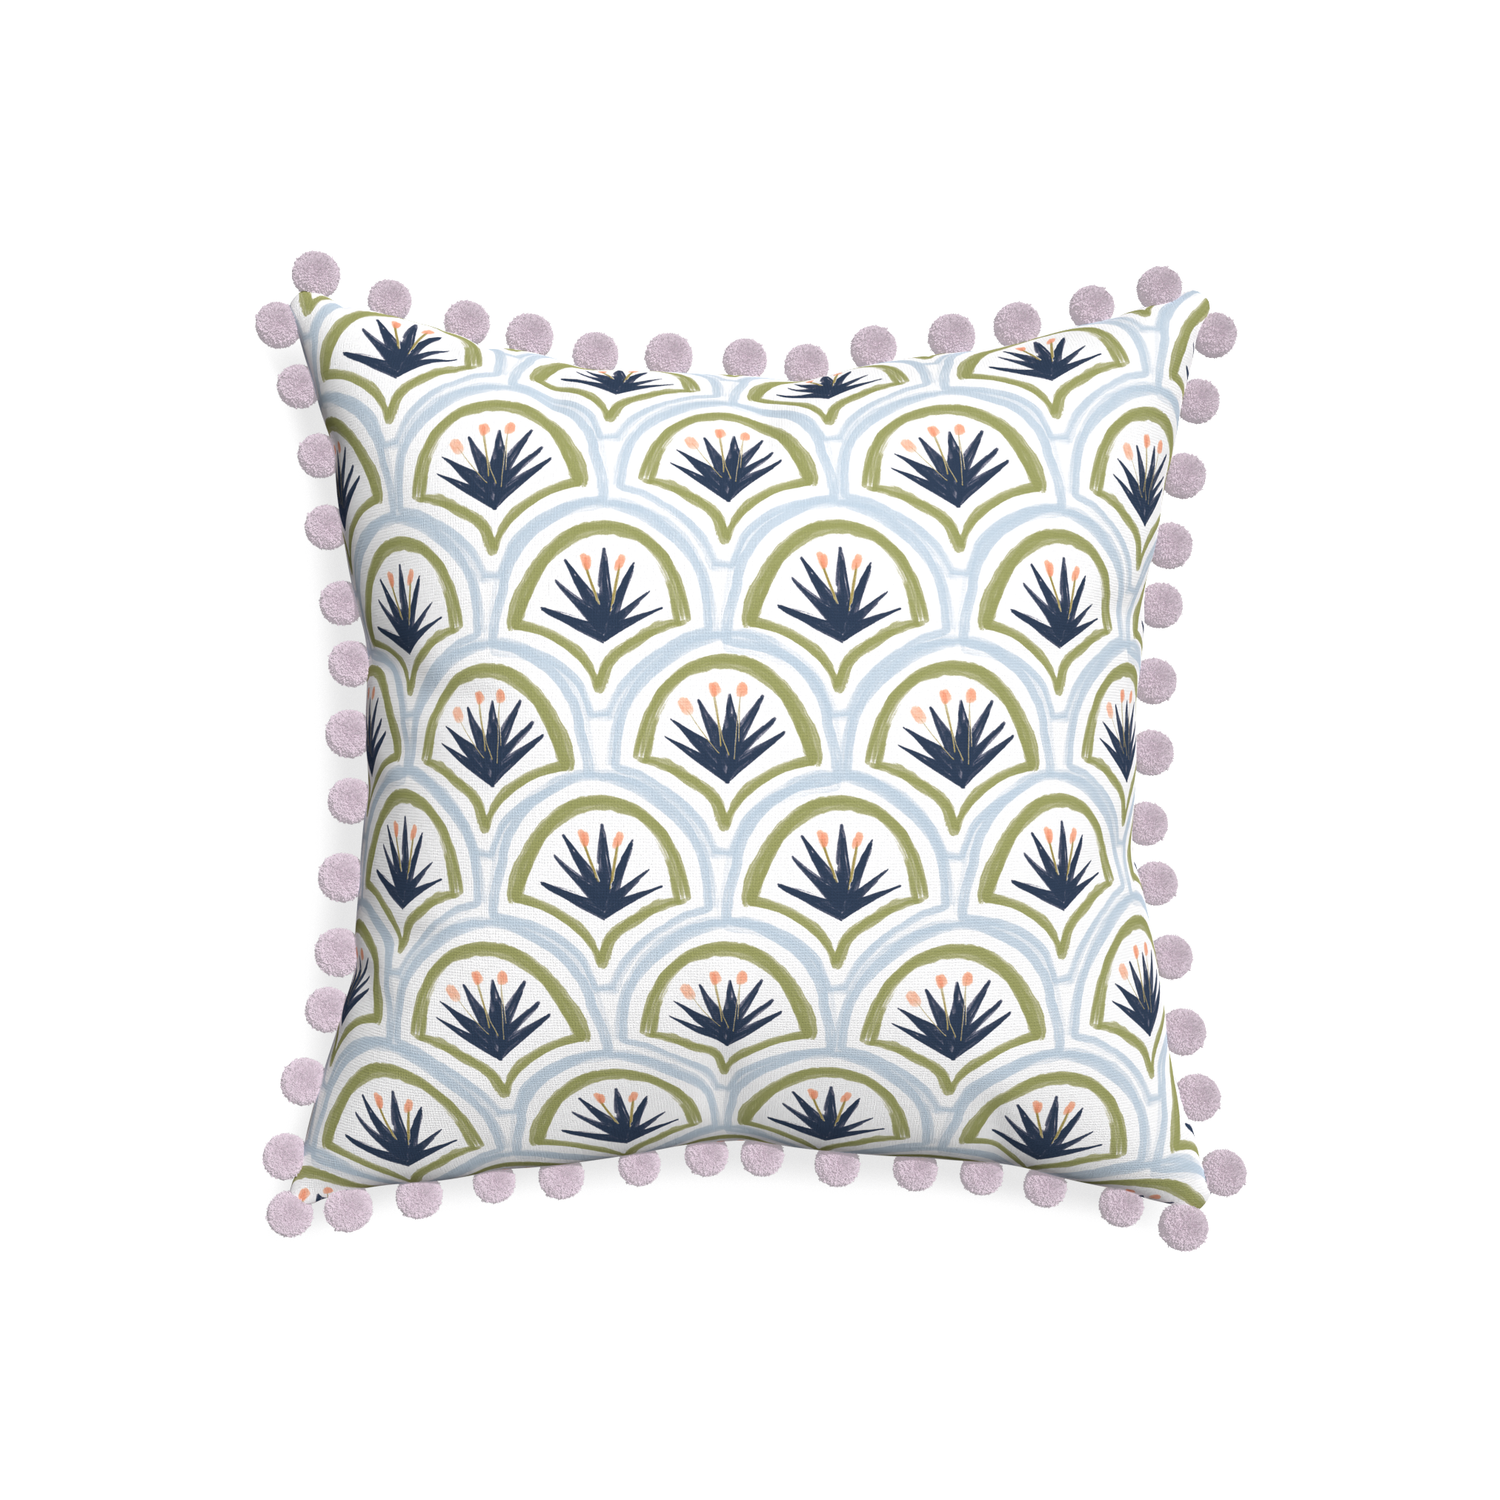 20-square thatcher midnight custom art deco palm patternpillow with l on white background